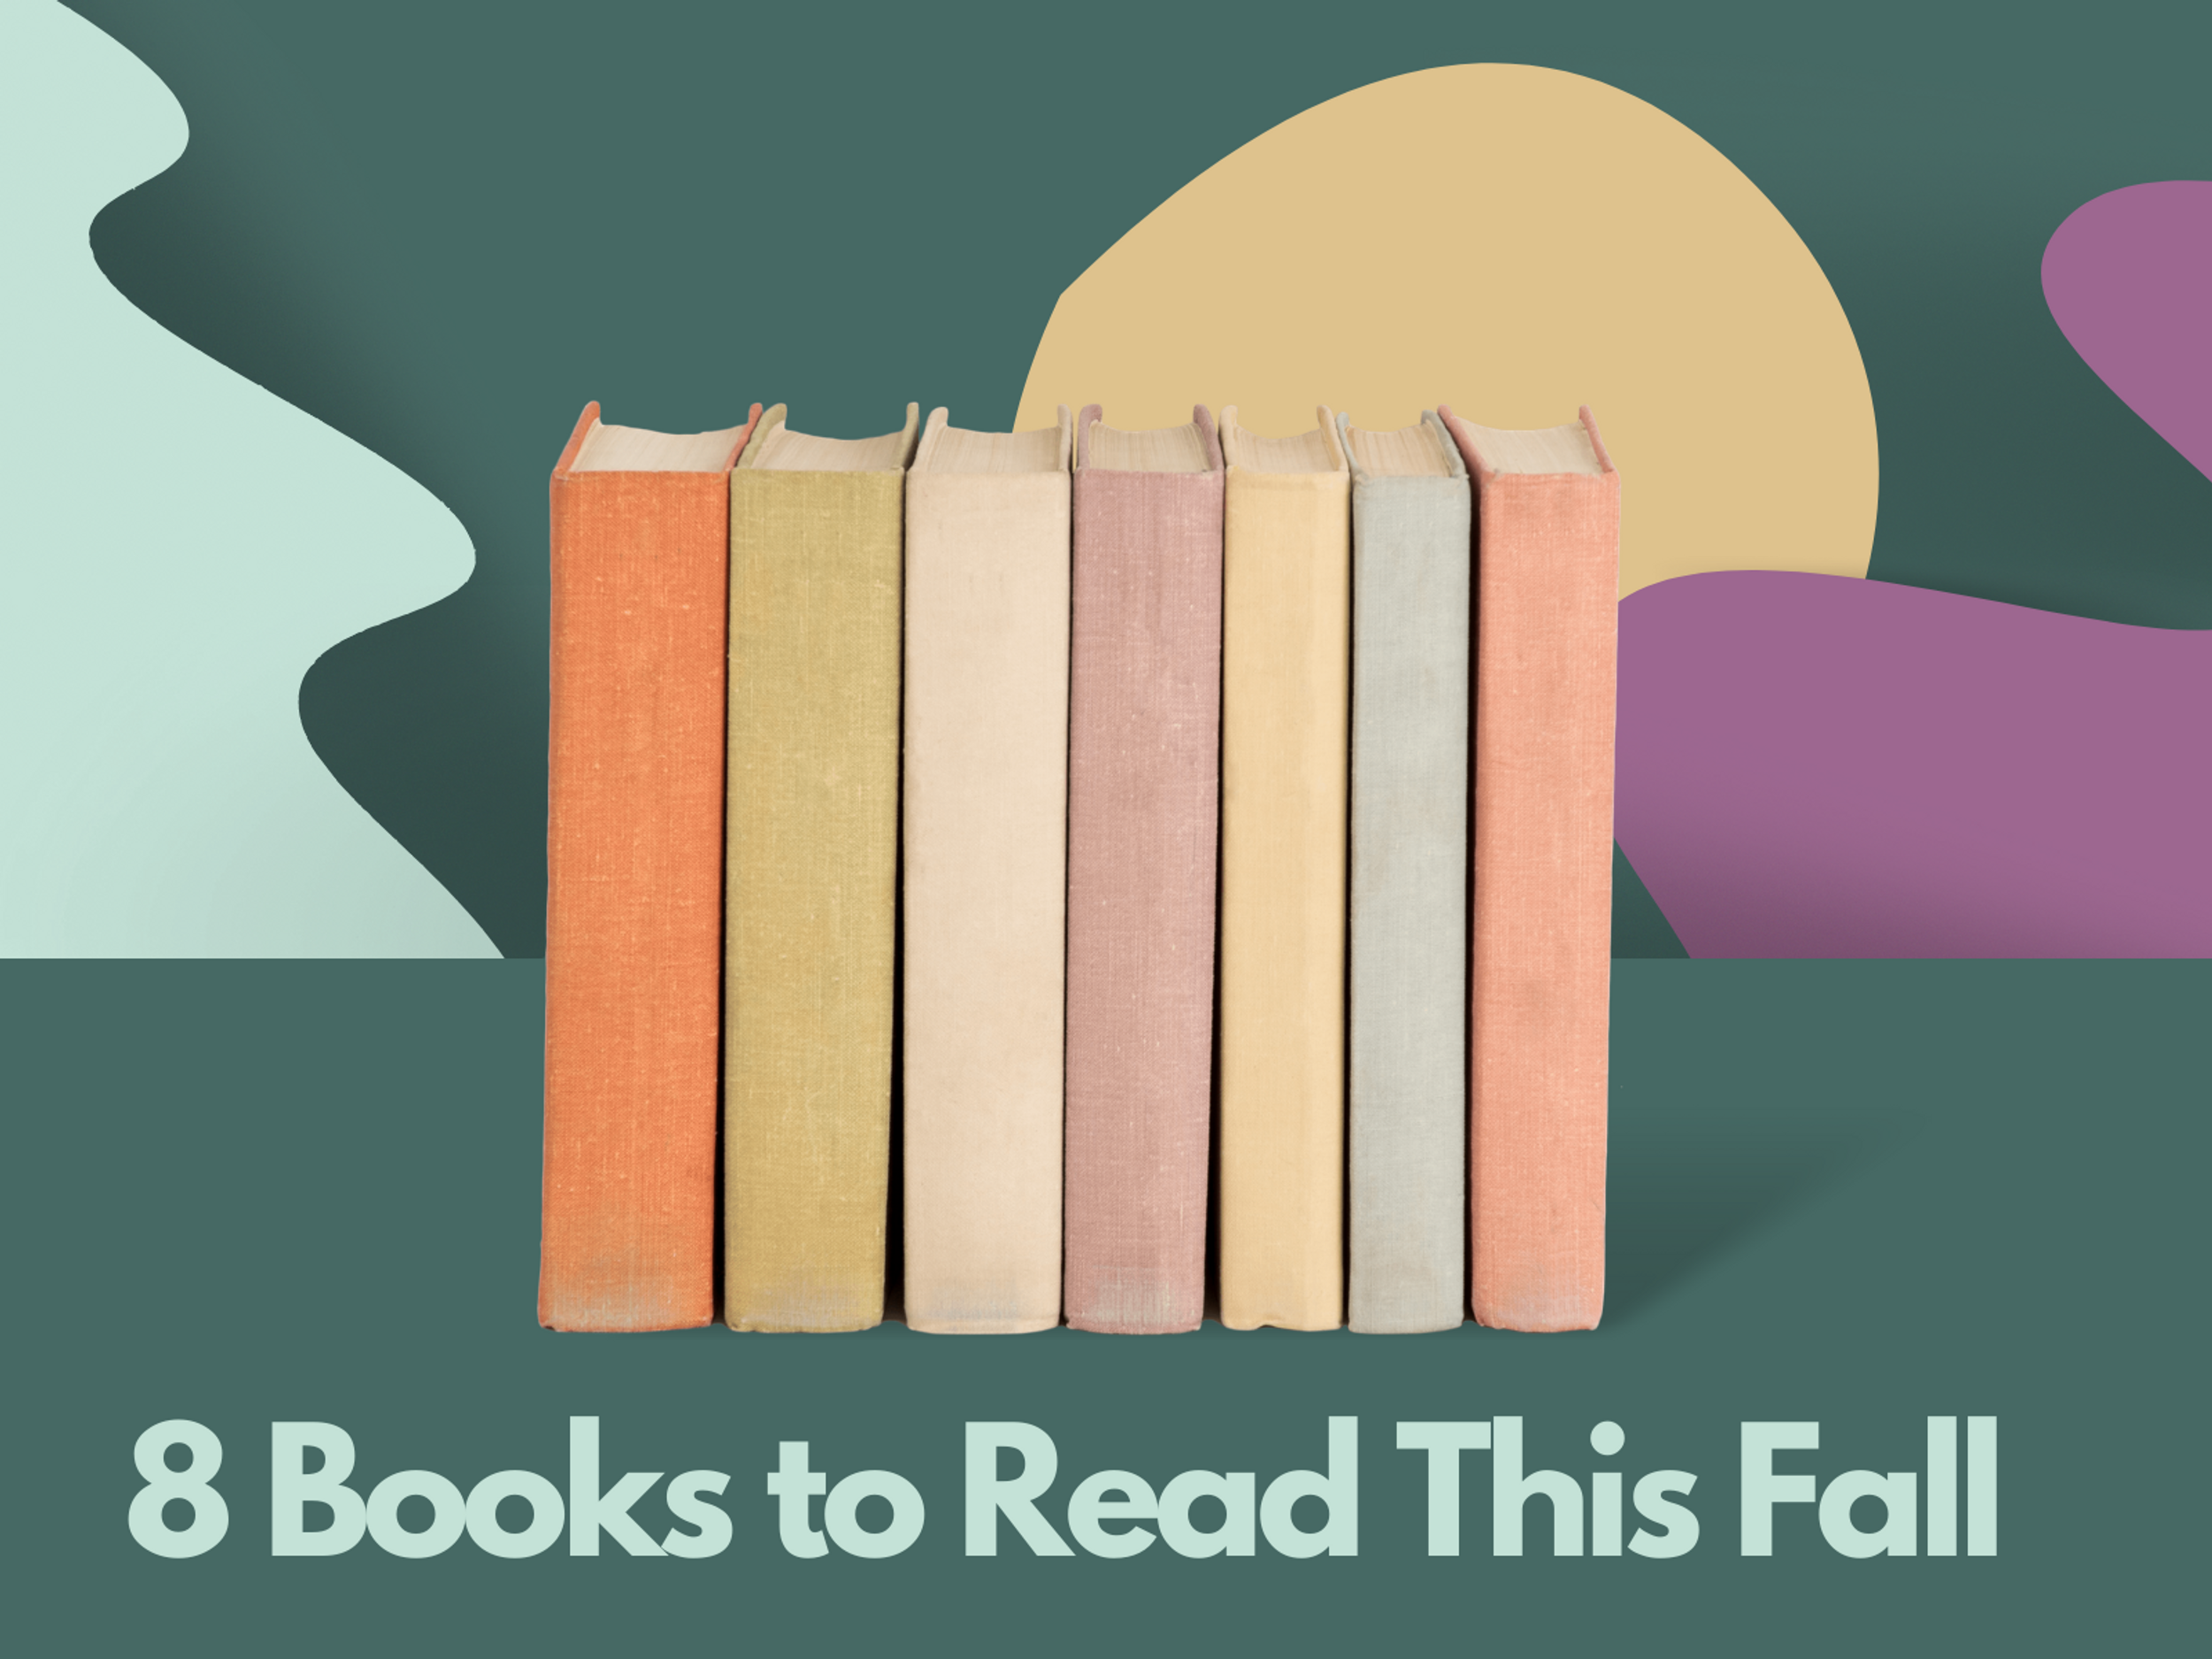 8 Books By Women to Read this Fall - 2020 Edition